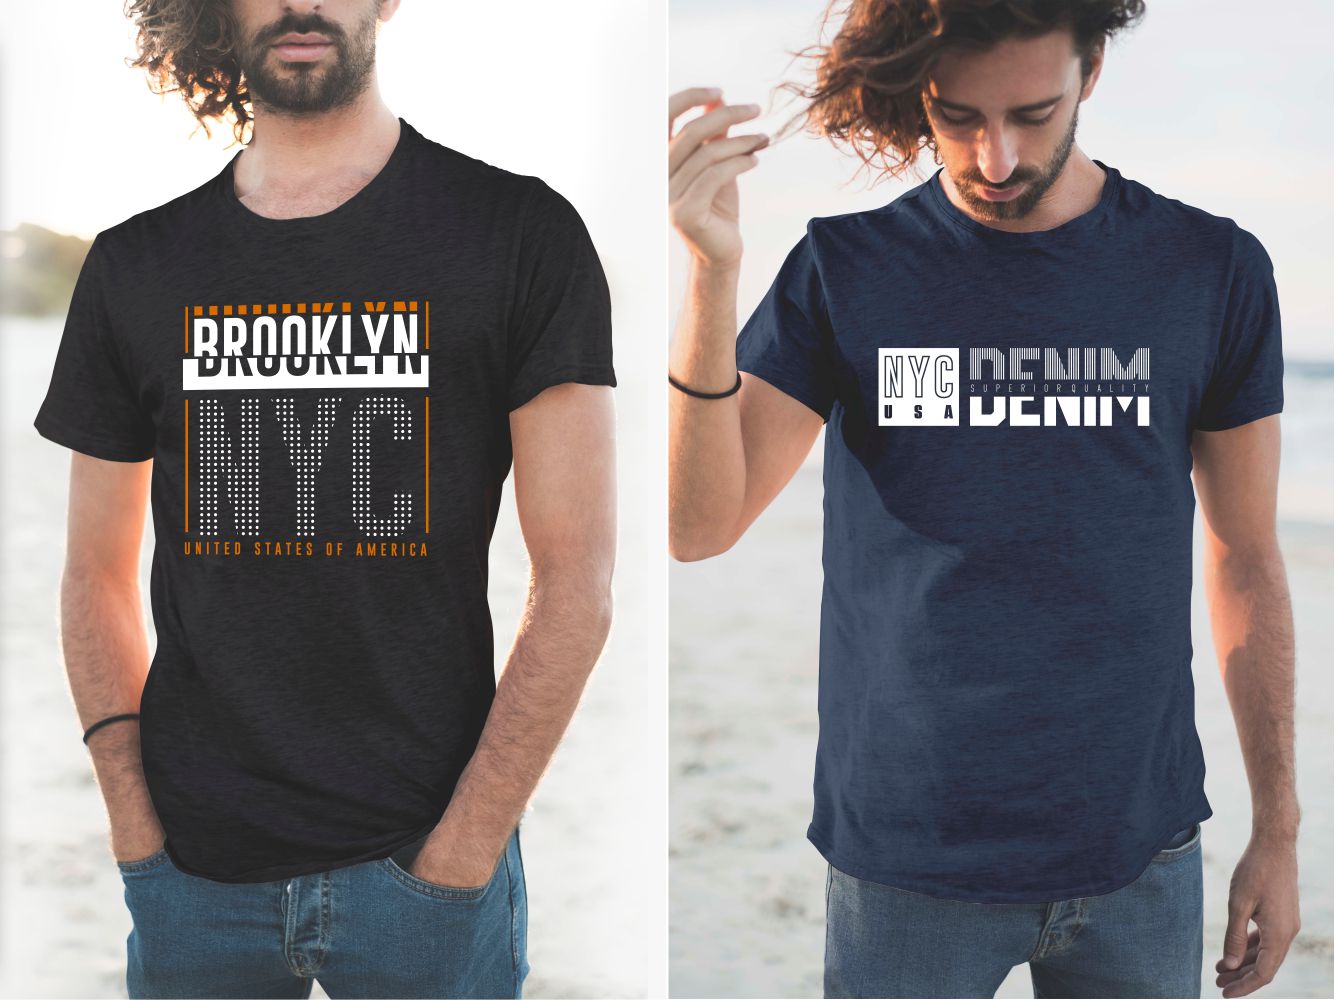 Blue and black T-shirts with original lettering.